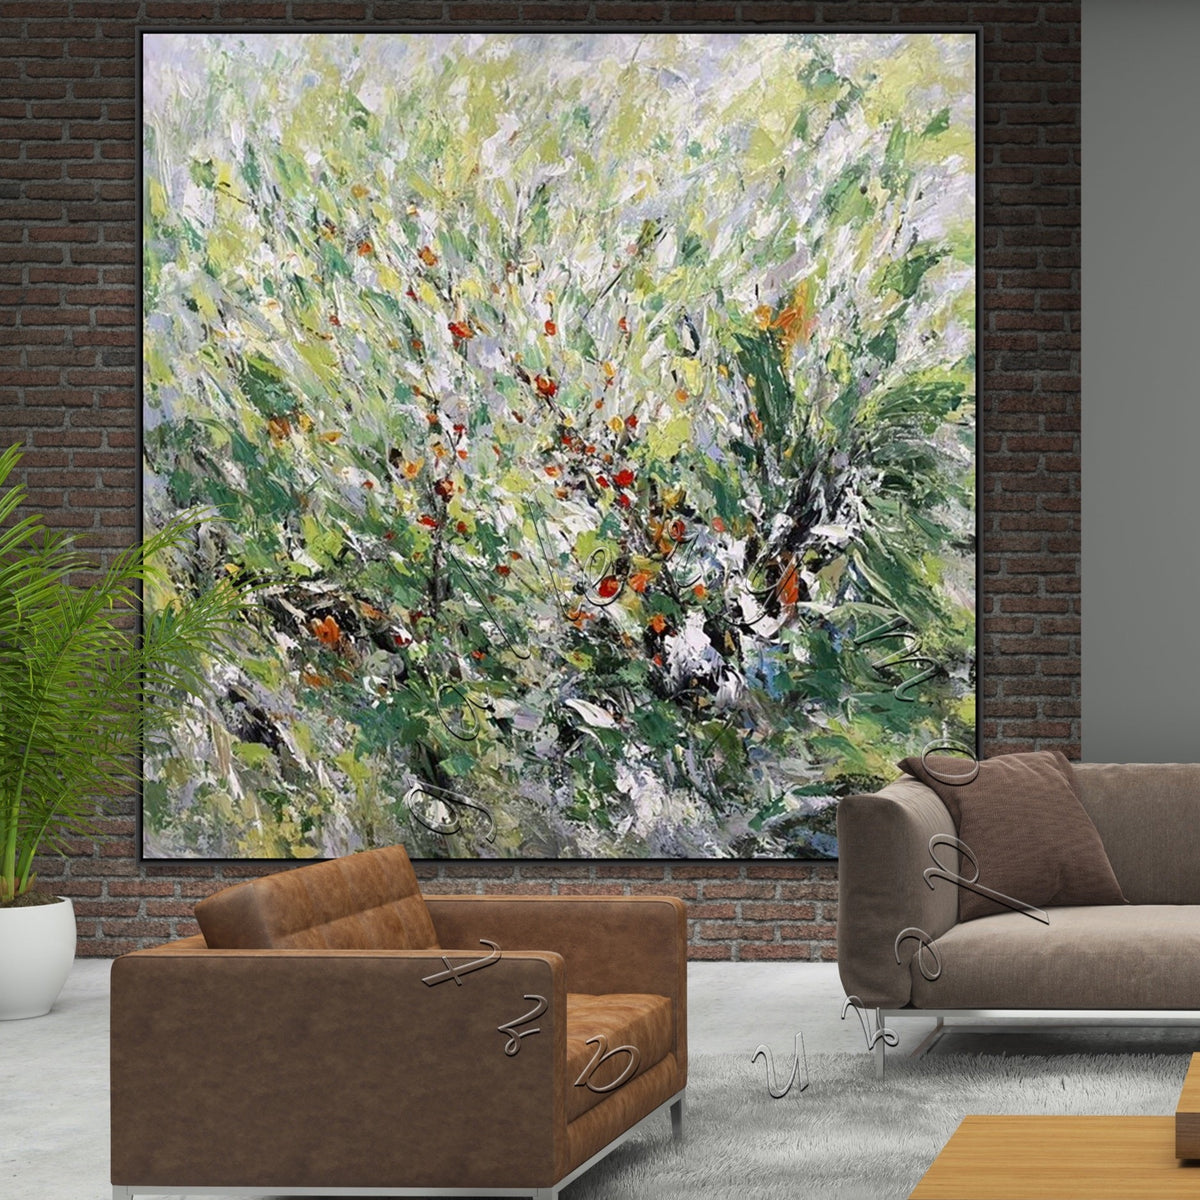 Wild Flowers Abstract Painting, Textured Original Oil Painting, Square Wall Art